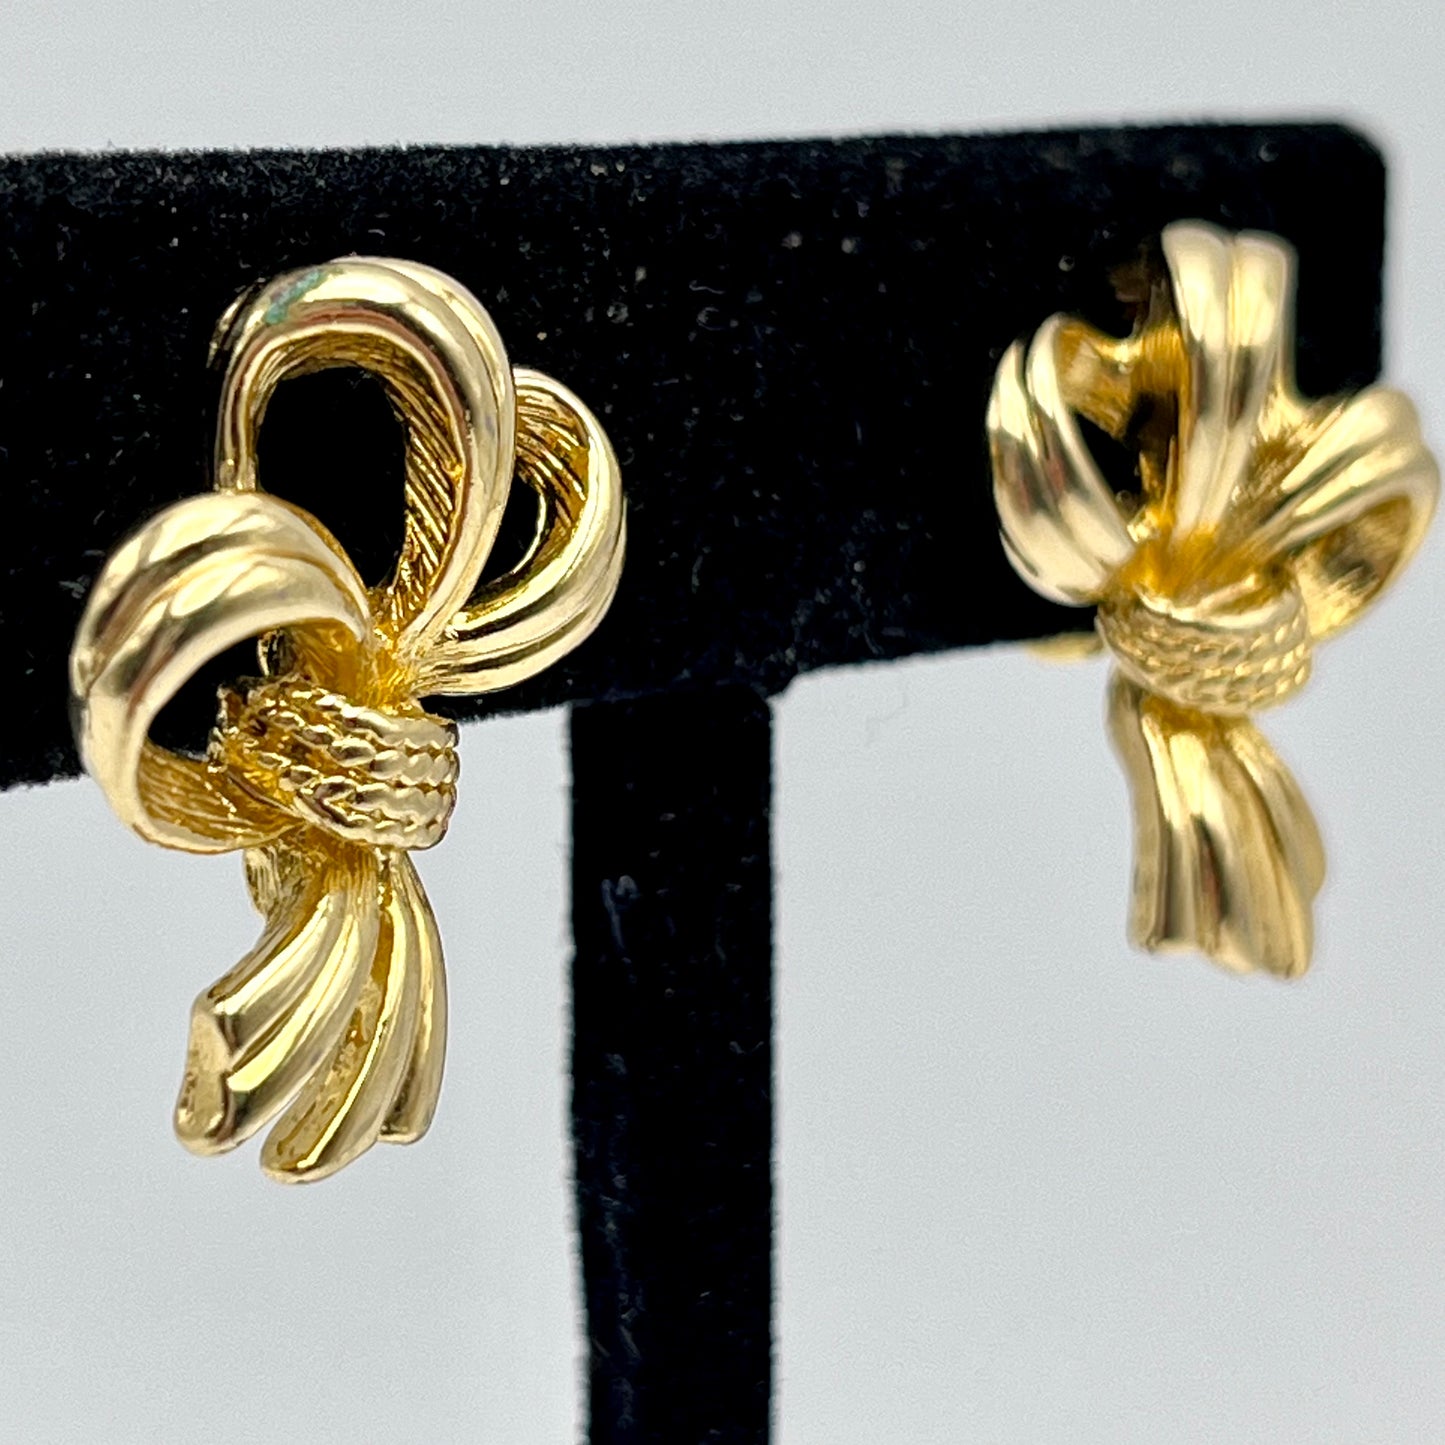 1957 Sarah Coventry Beau Catcher Earrings